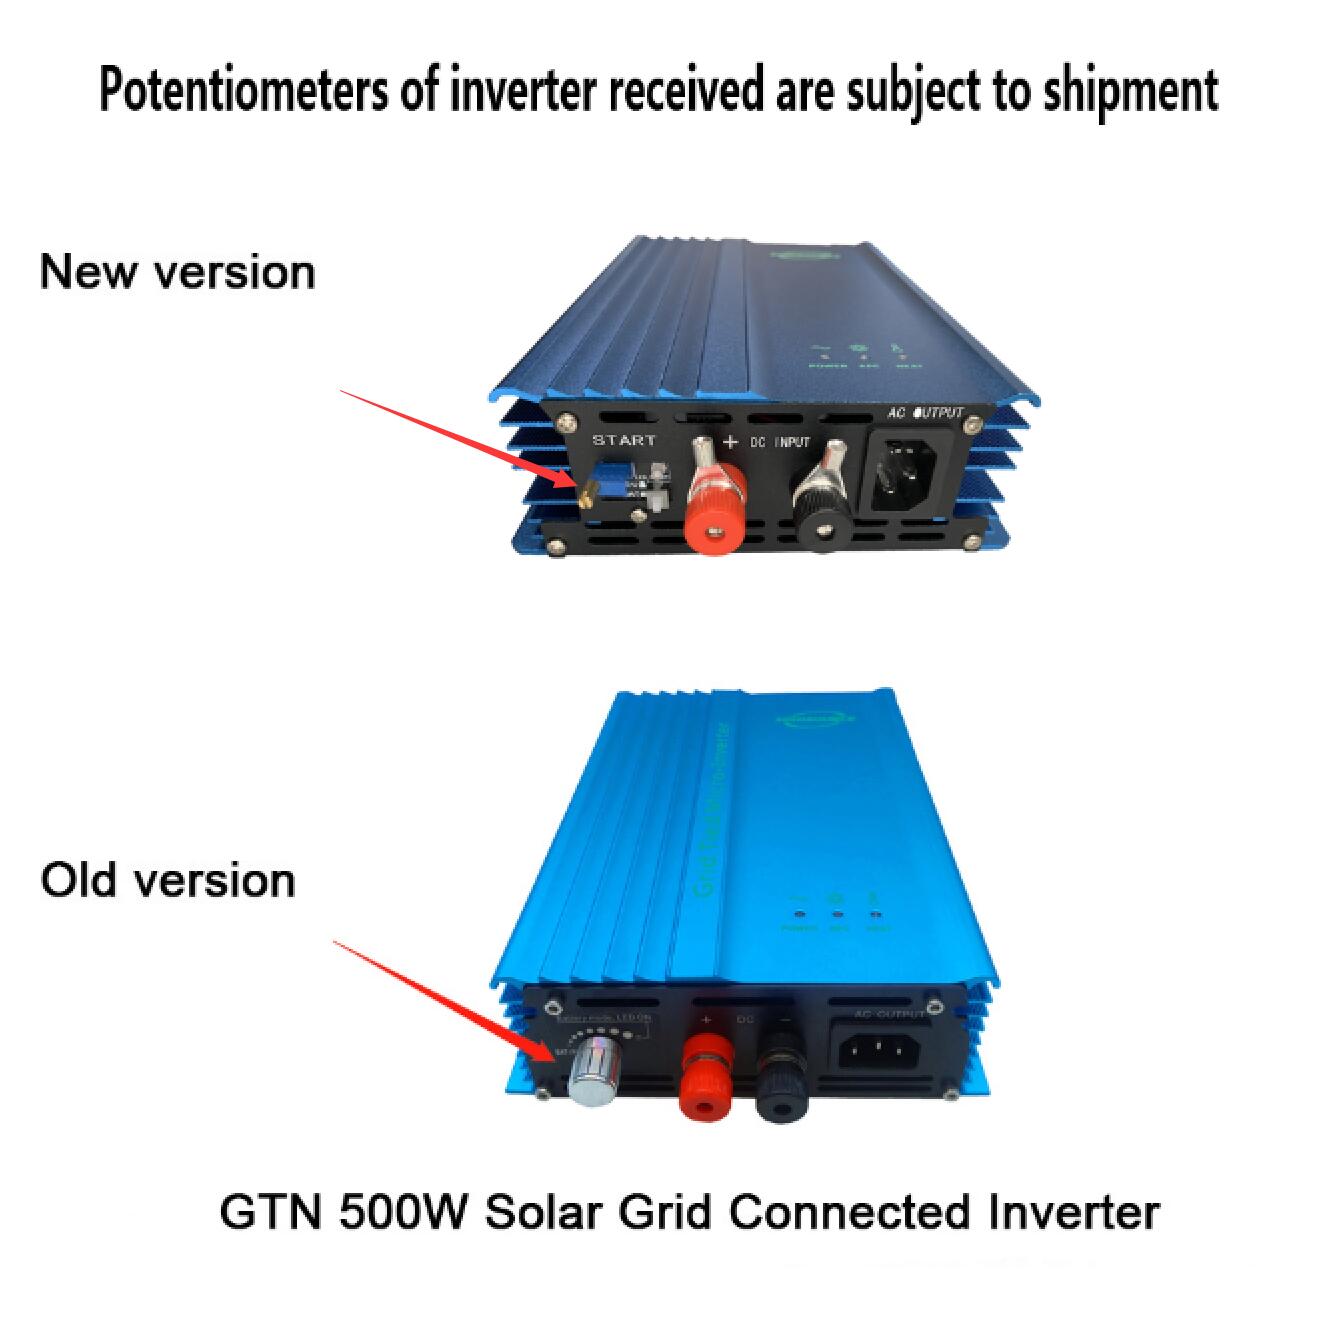 potentiometers of inverter received are subject to shipment